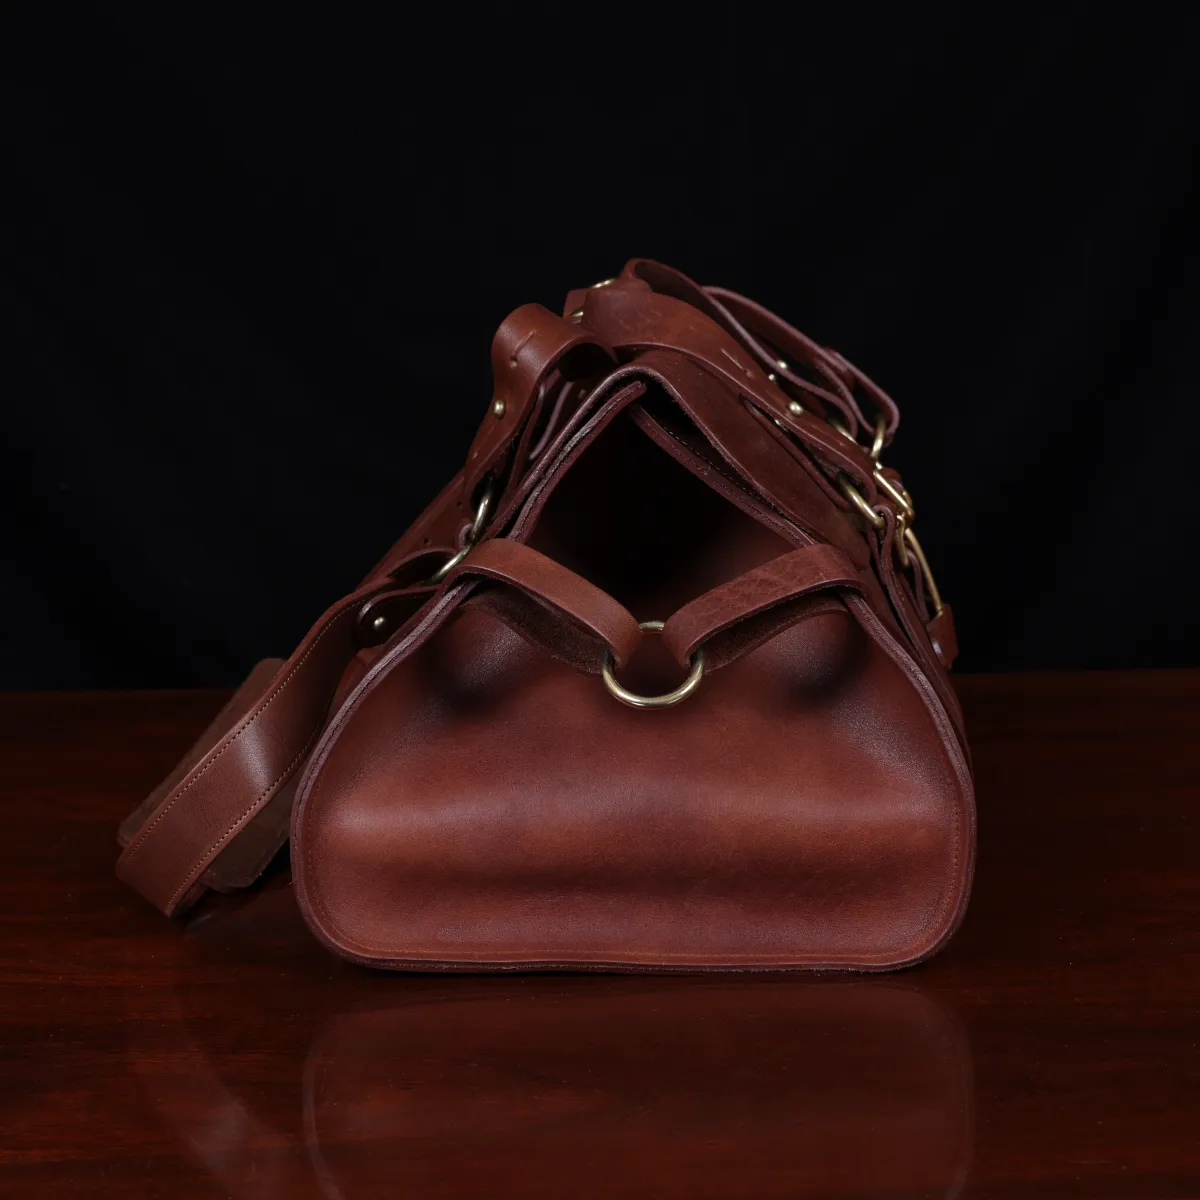 leather travel bag - side view- on a wooden table with a dark background